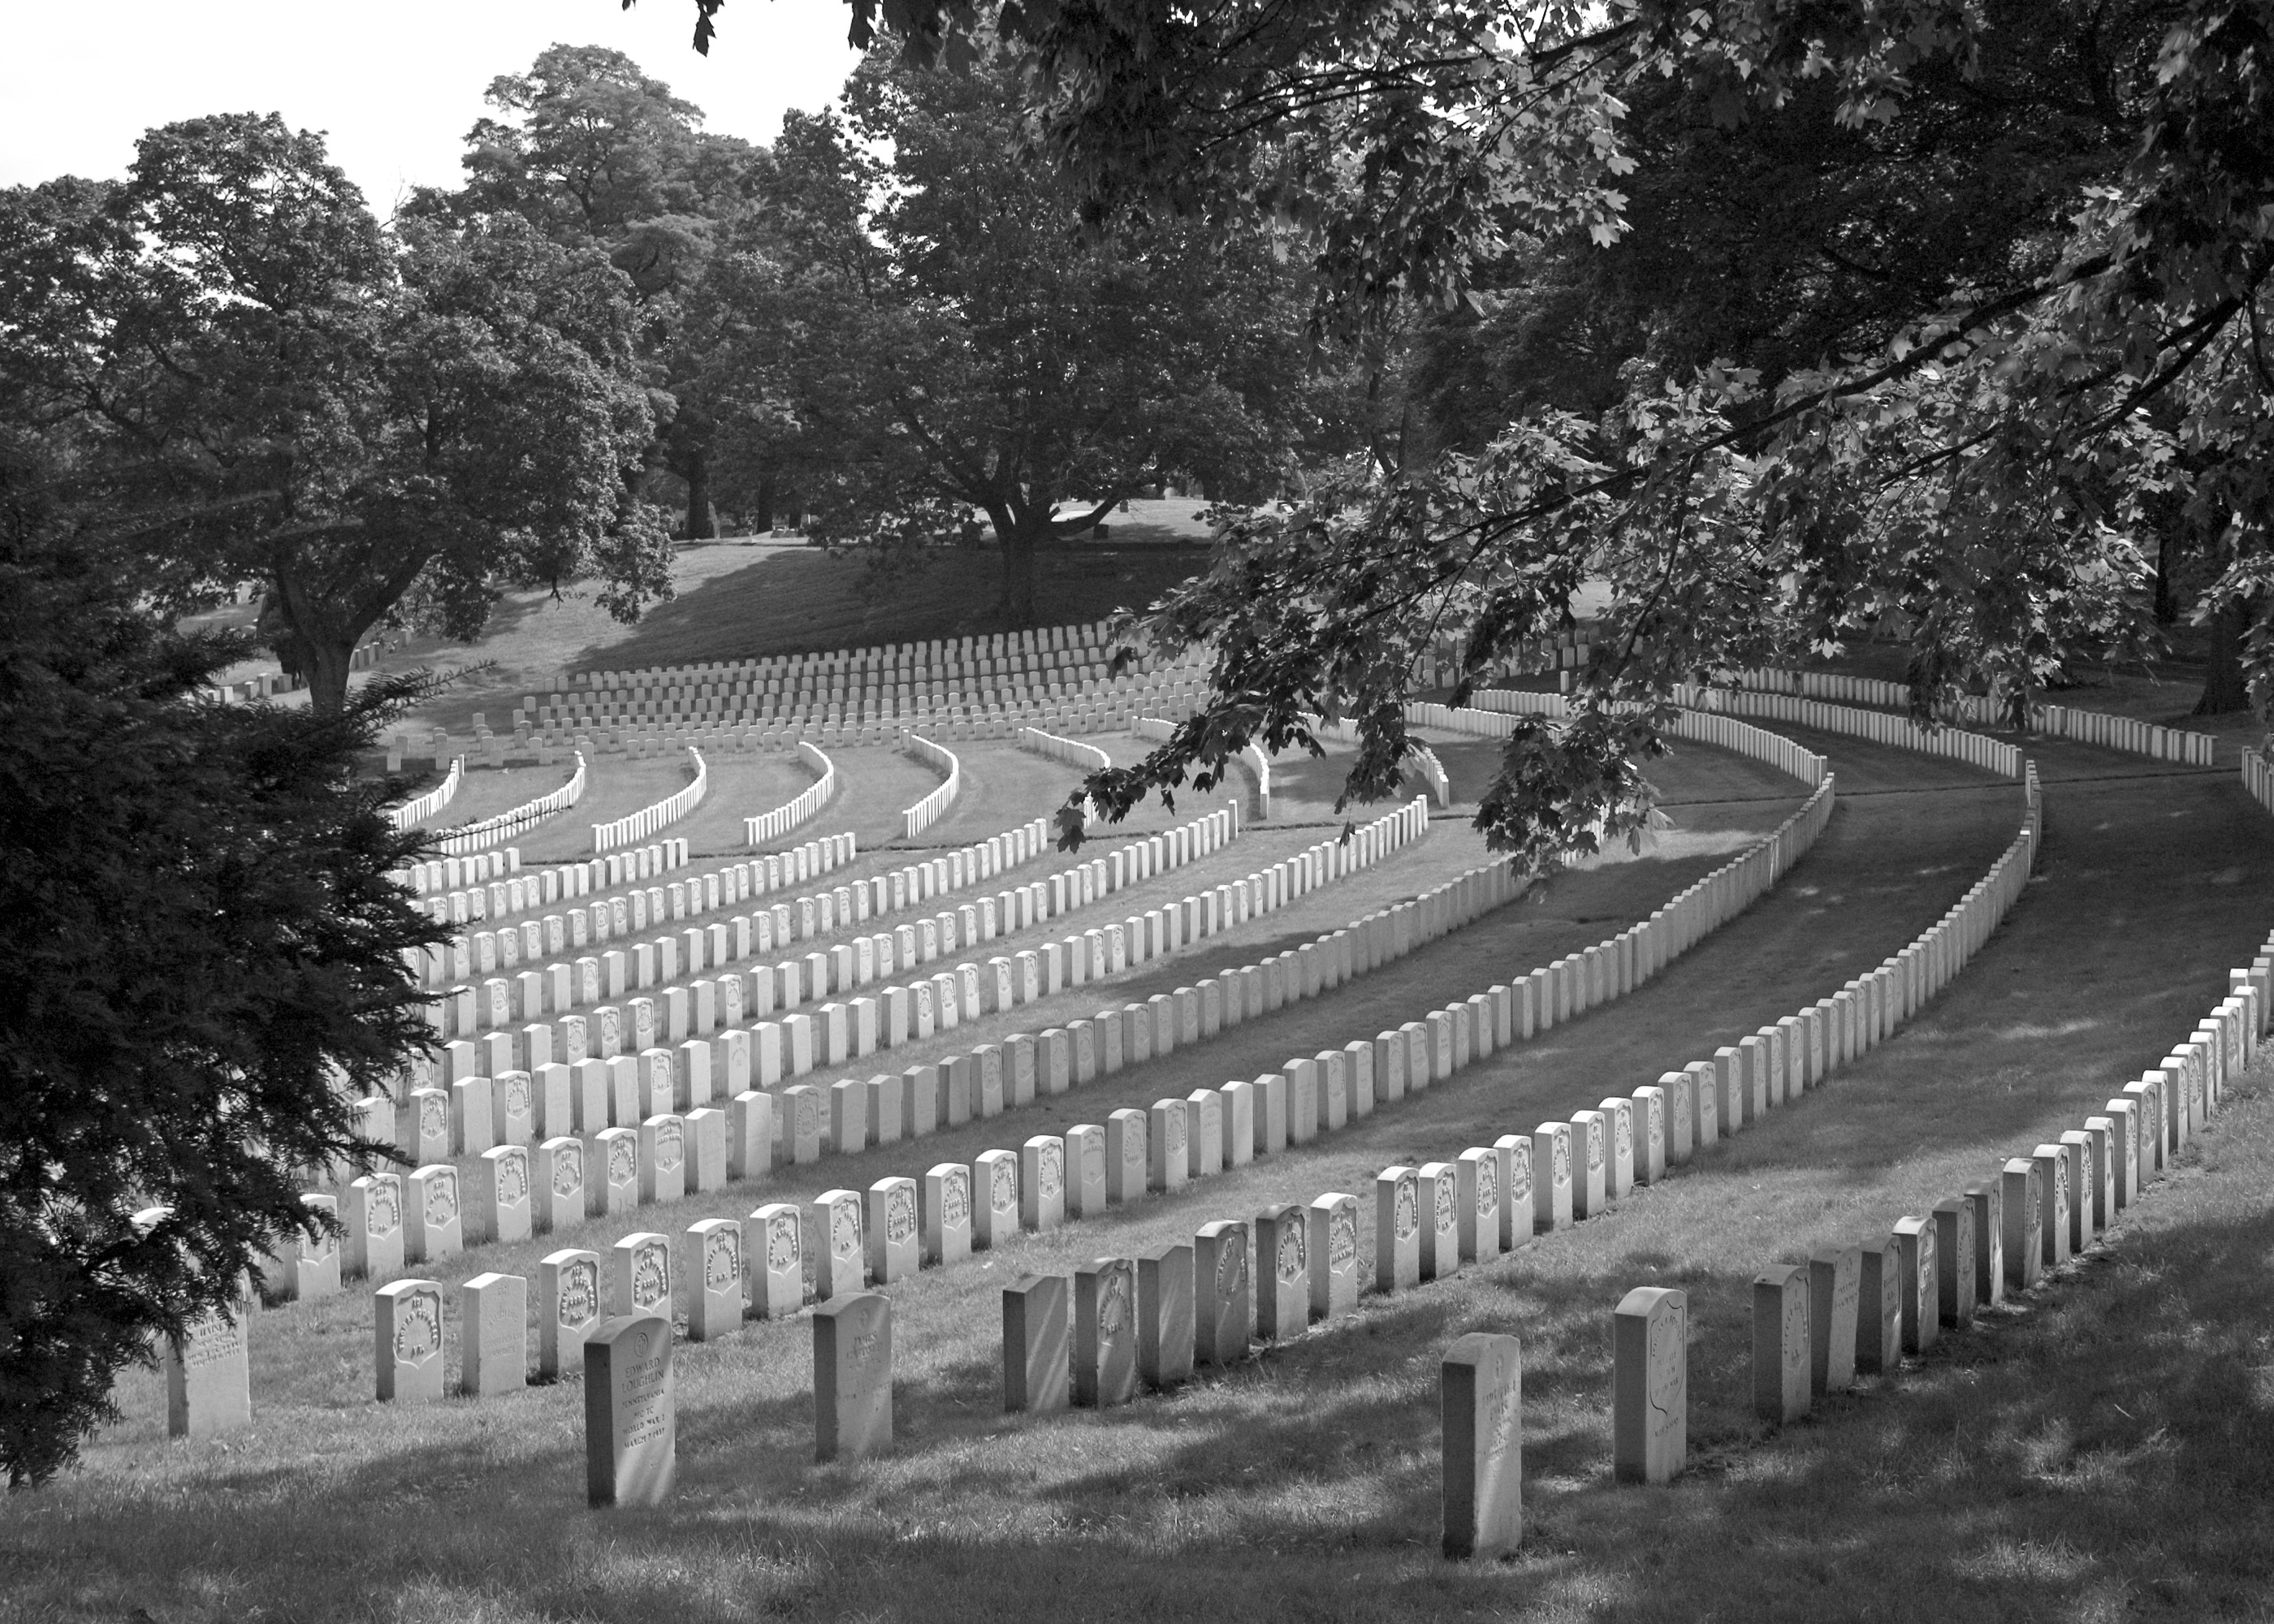 black and white photograph of a military cemetery